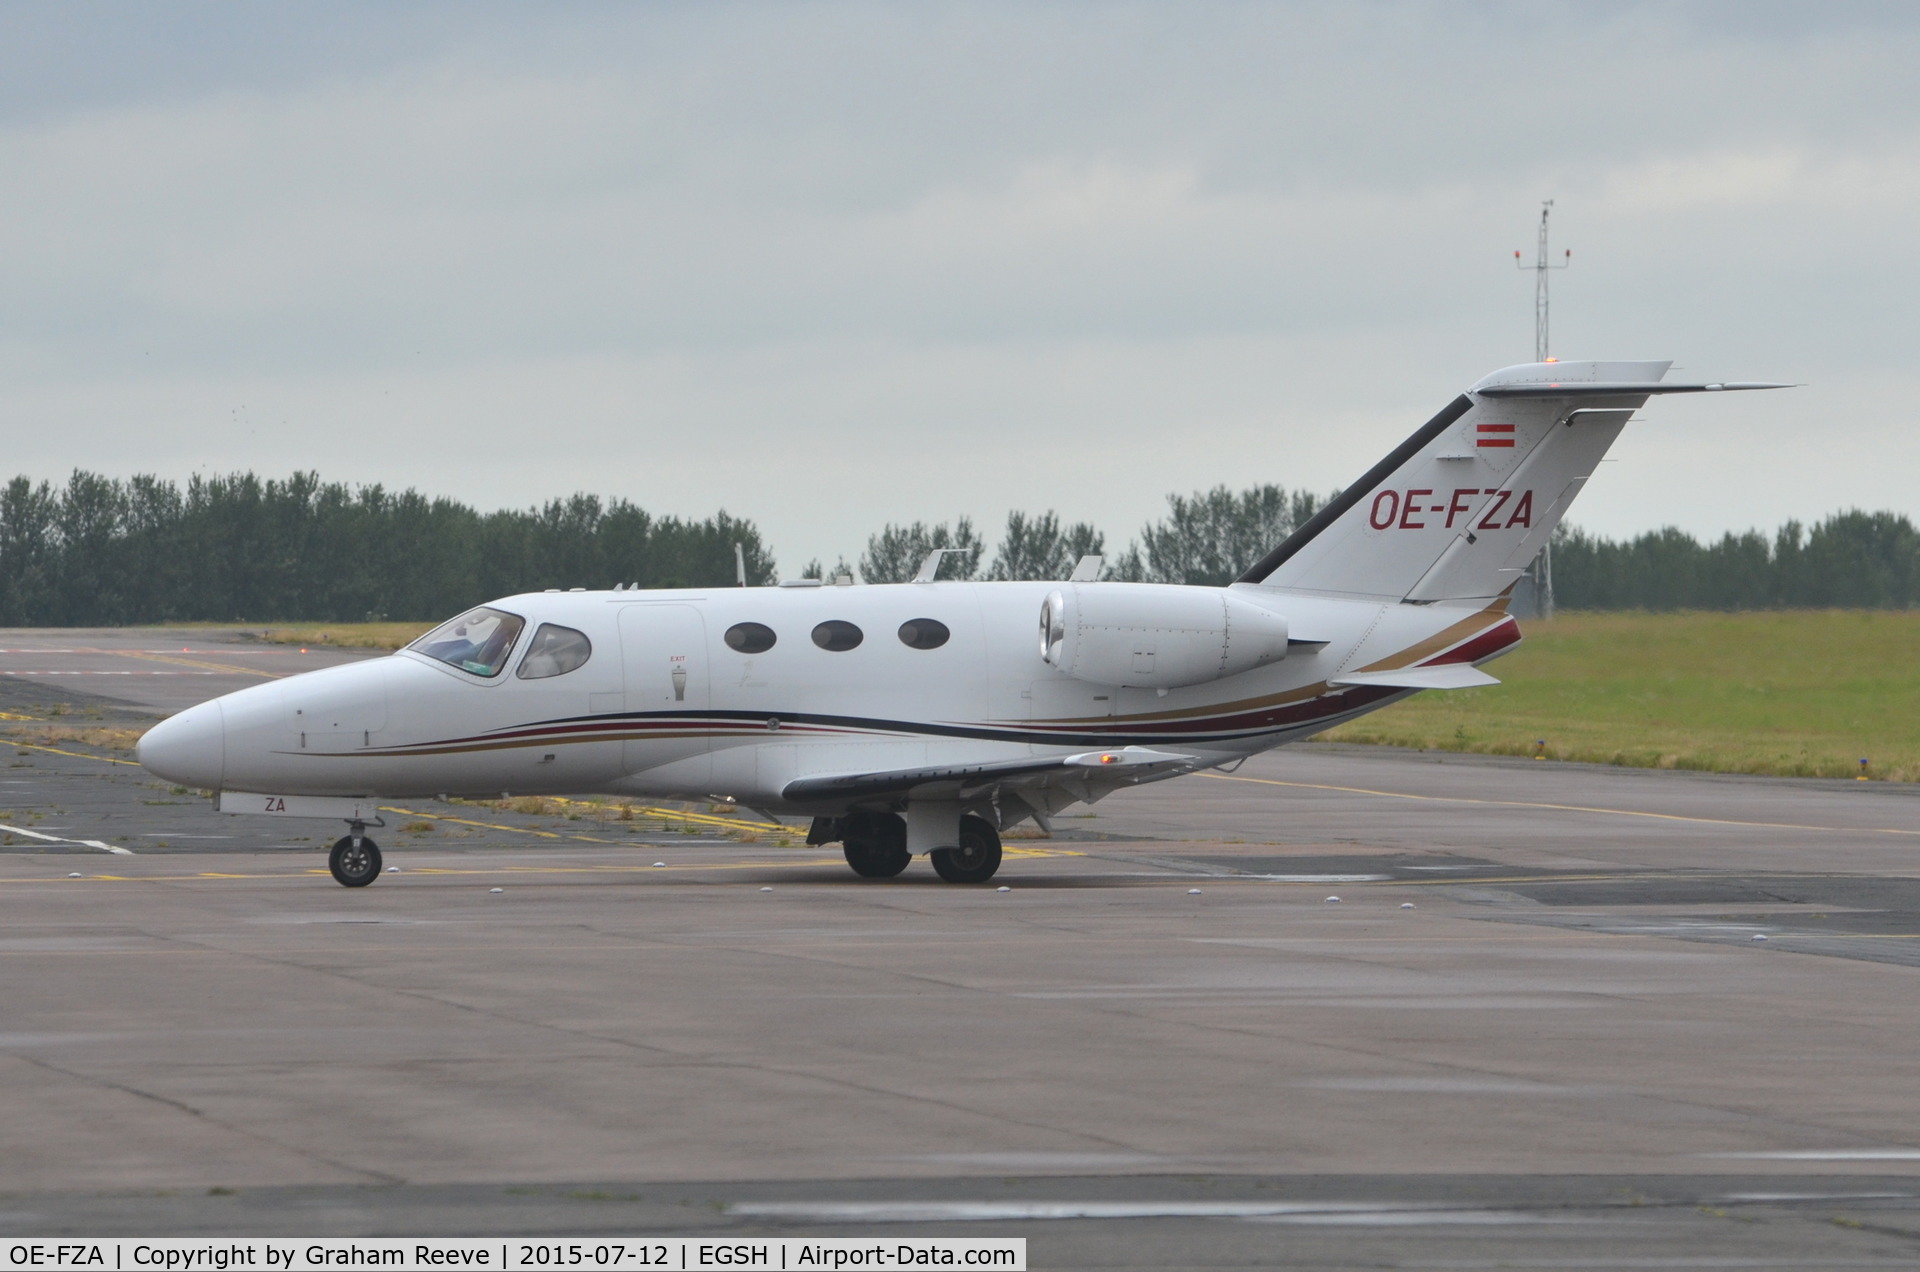 OE-FZA, 2008 Cessna 510 Citation Mustang Citation Mustang C/N 510-0144, Just landed at Norwich.